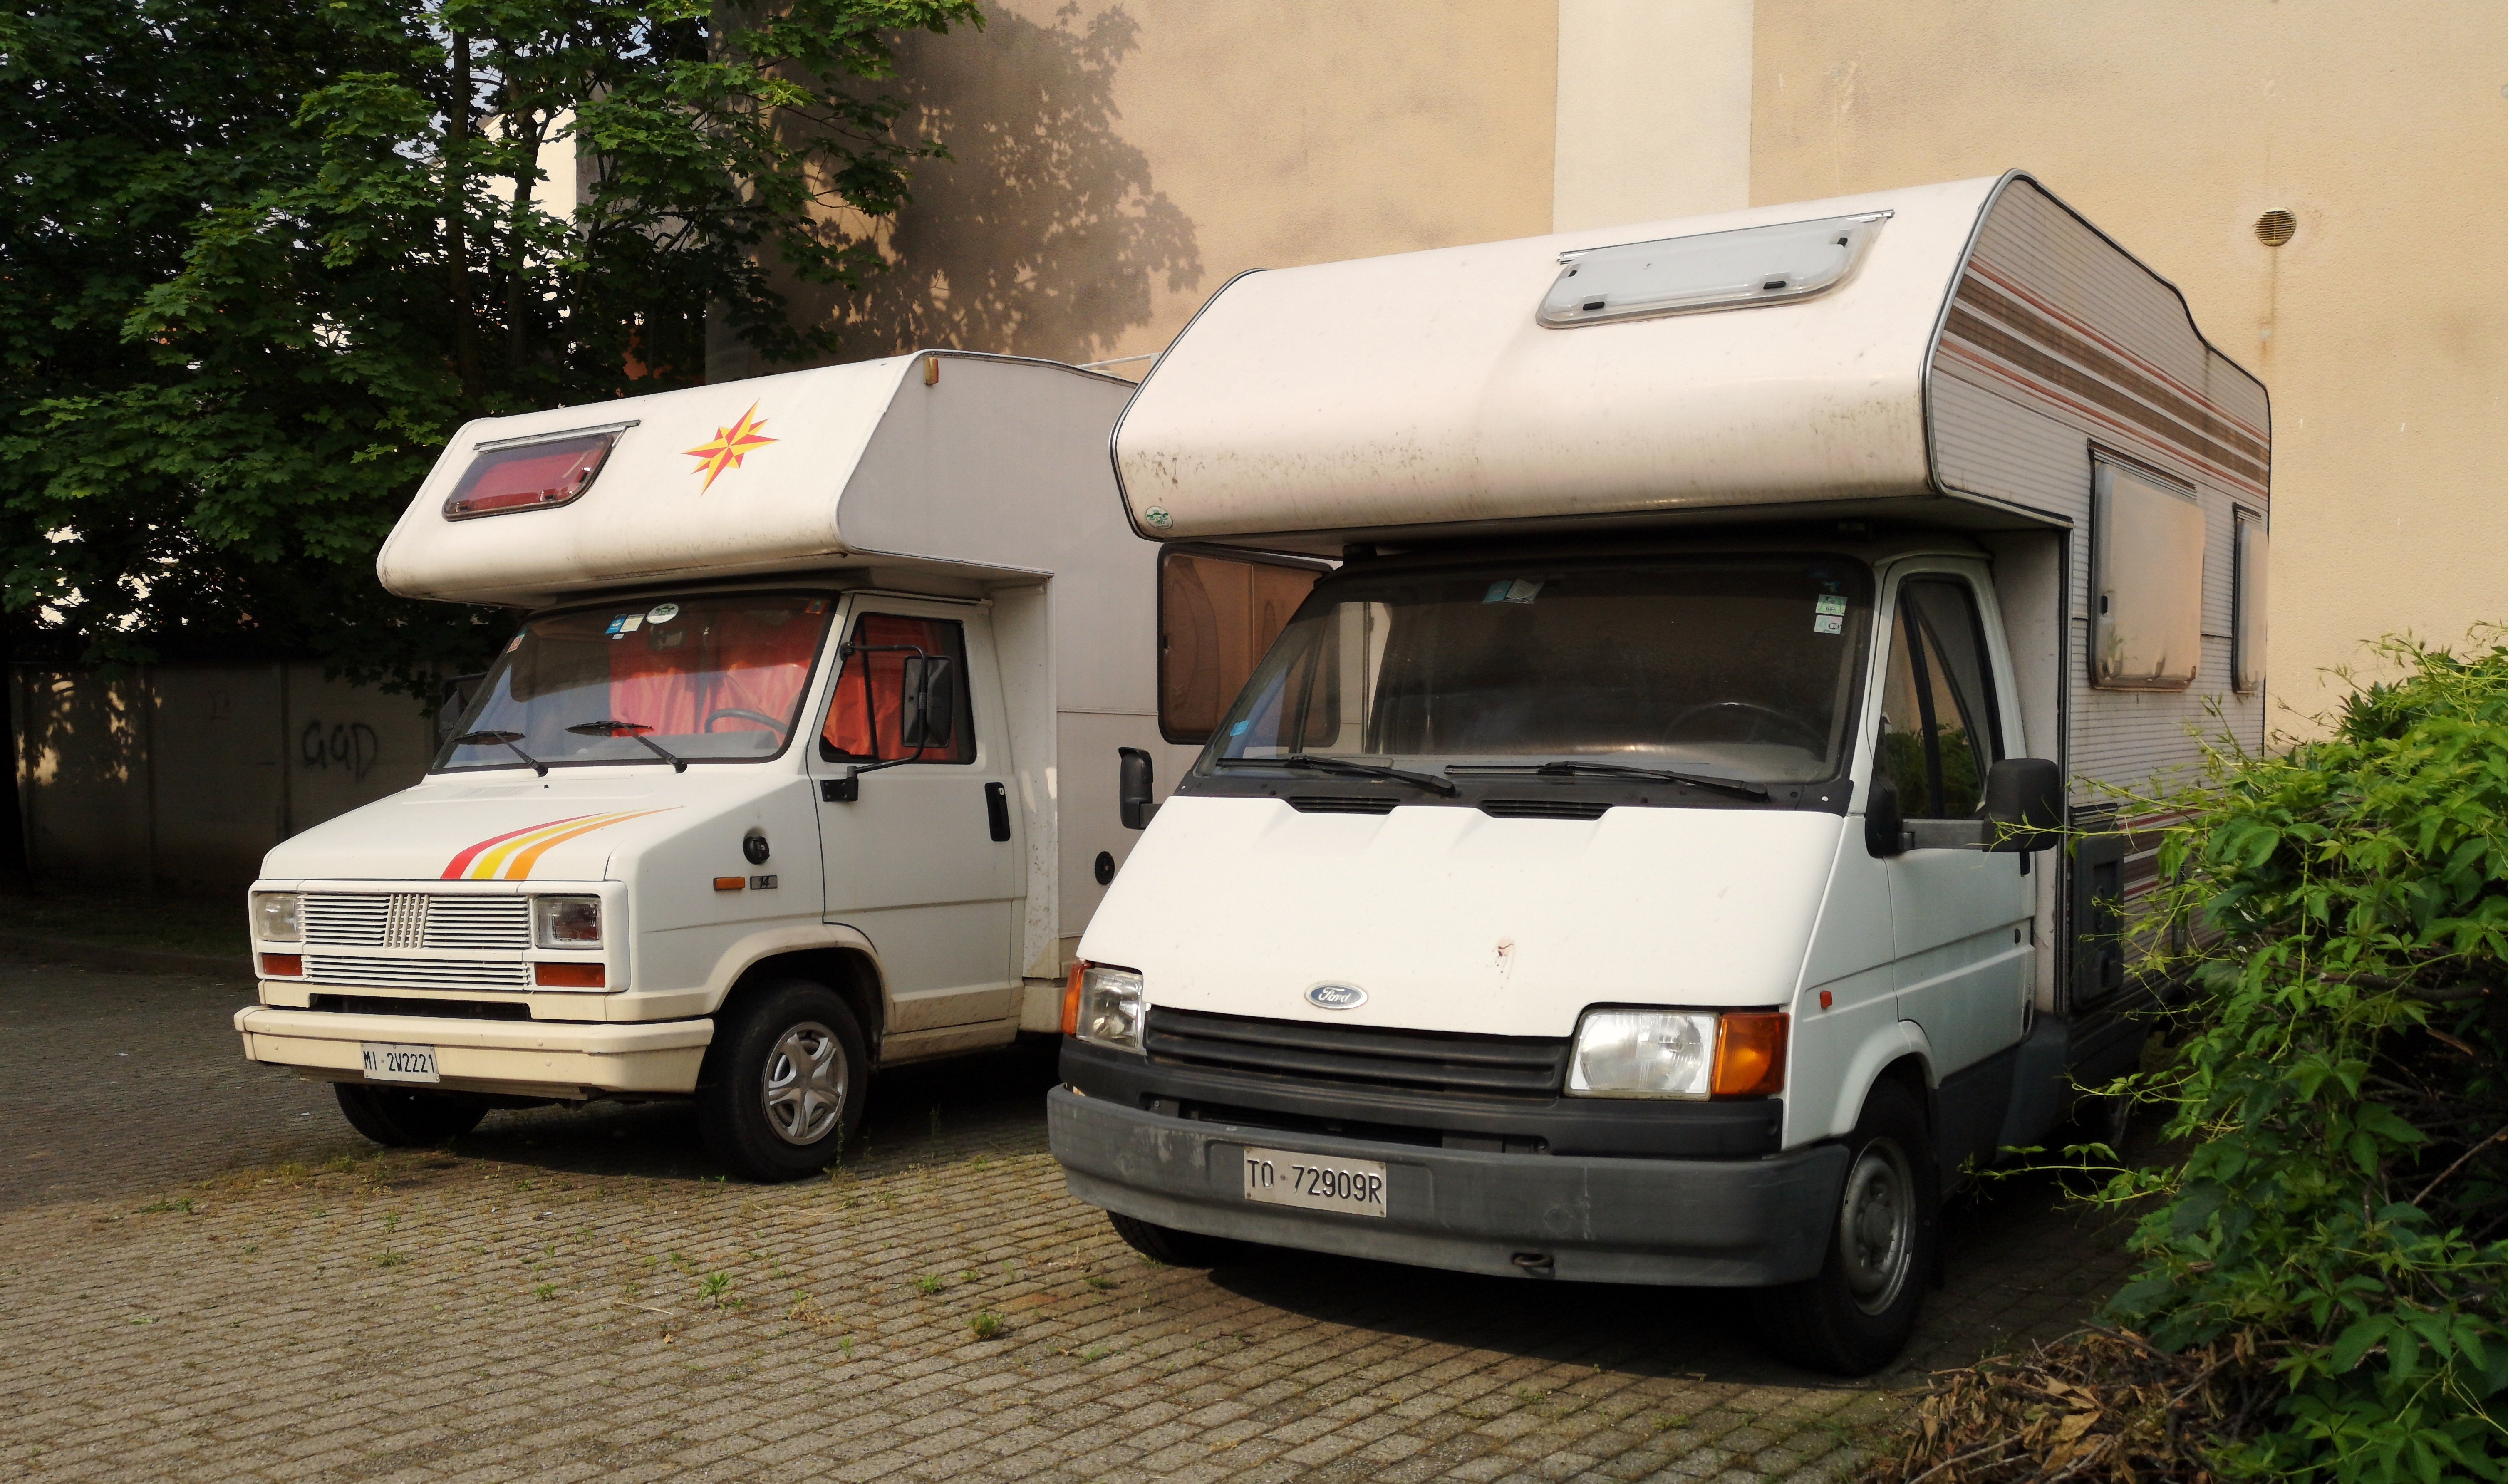 Ducato Camper & Ford Transit (48564342696).jpg - Wikimedia Commons